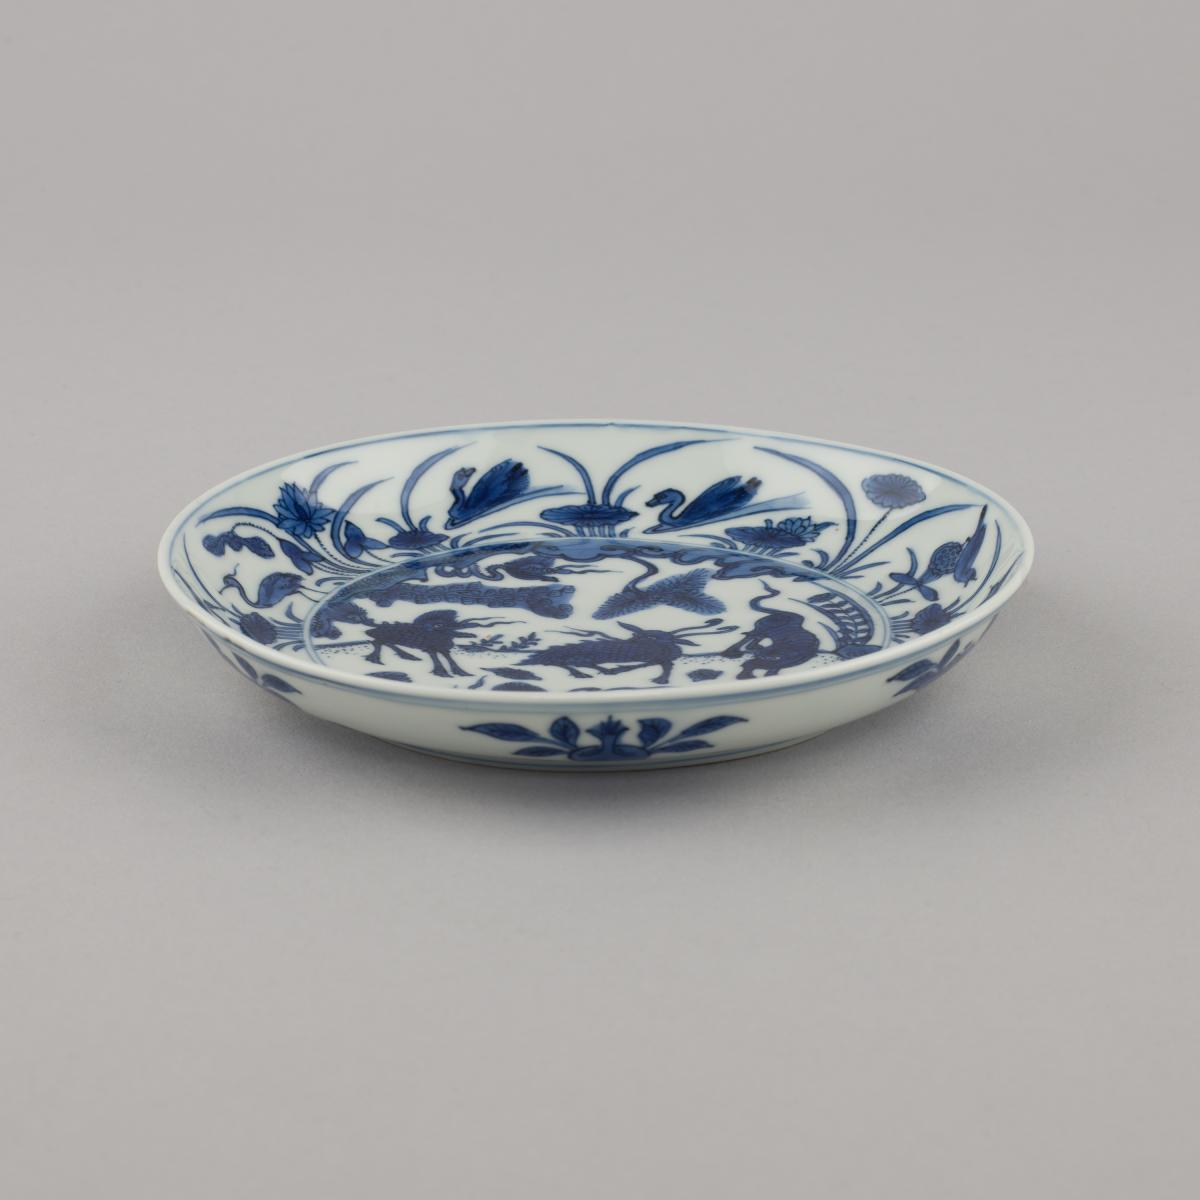 Chinese imperial porcelain blue and white small saucer dish